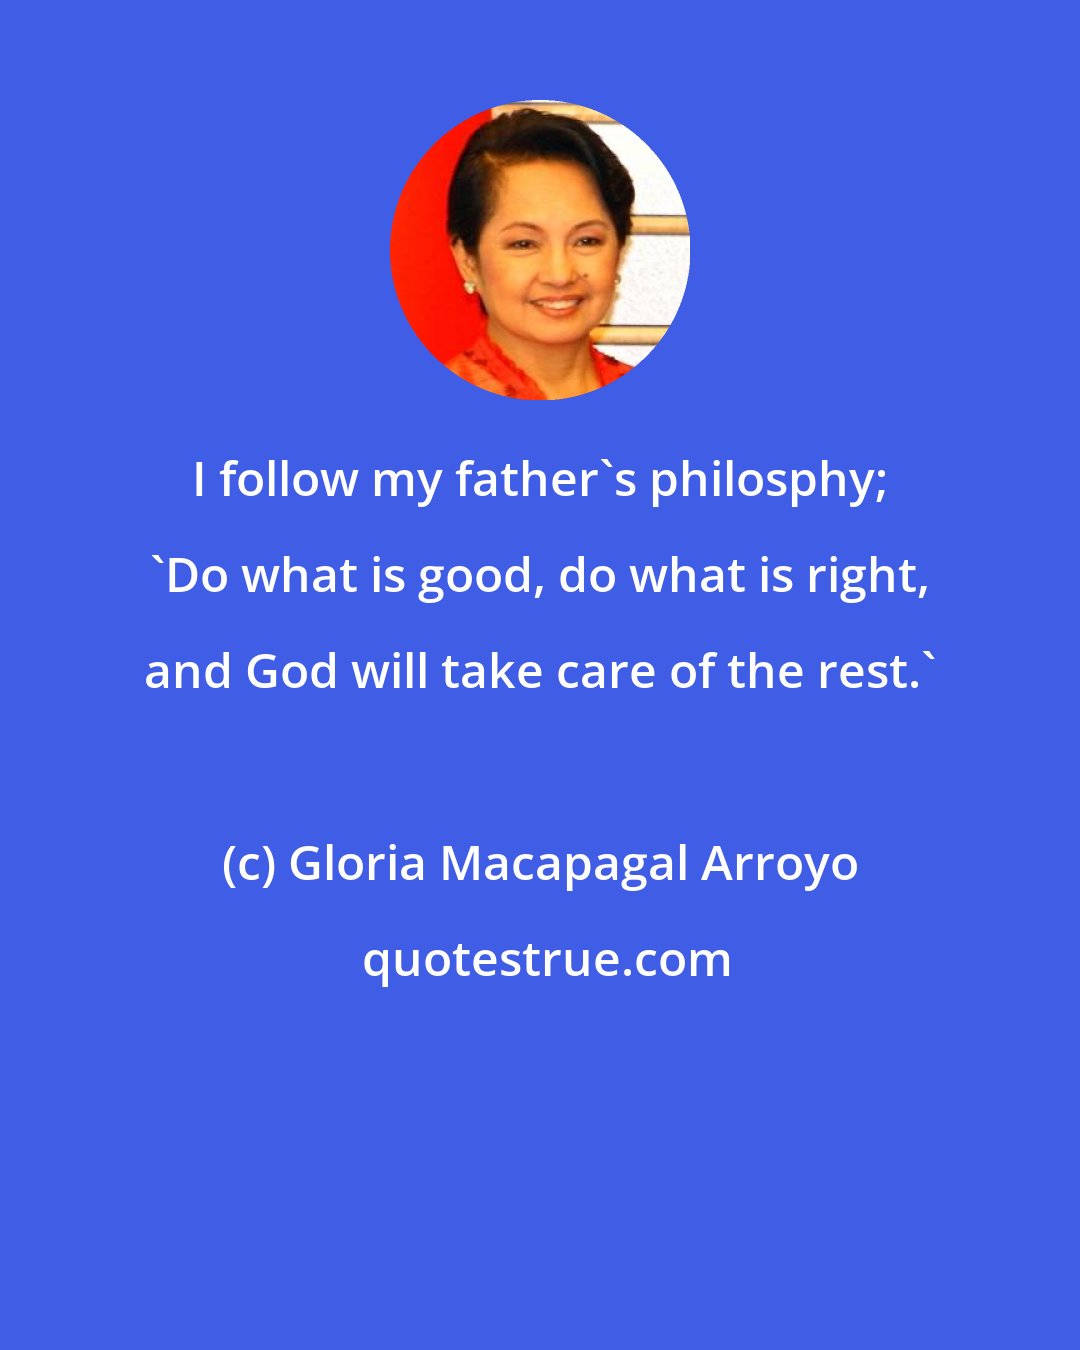 Gloria Macapagal Arroyo: I follow my father's philosphy; 'Do what is good, do what is right, and God will take care of the rest.'